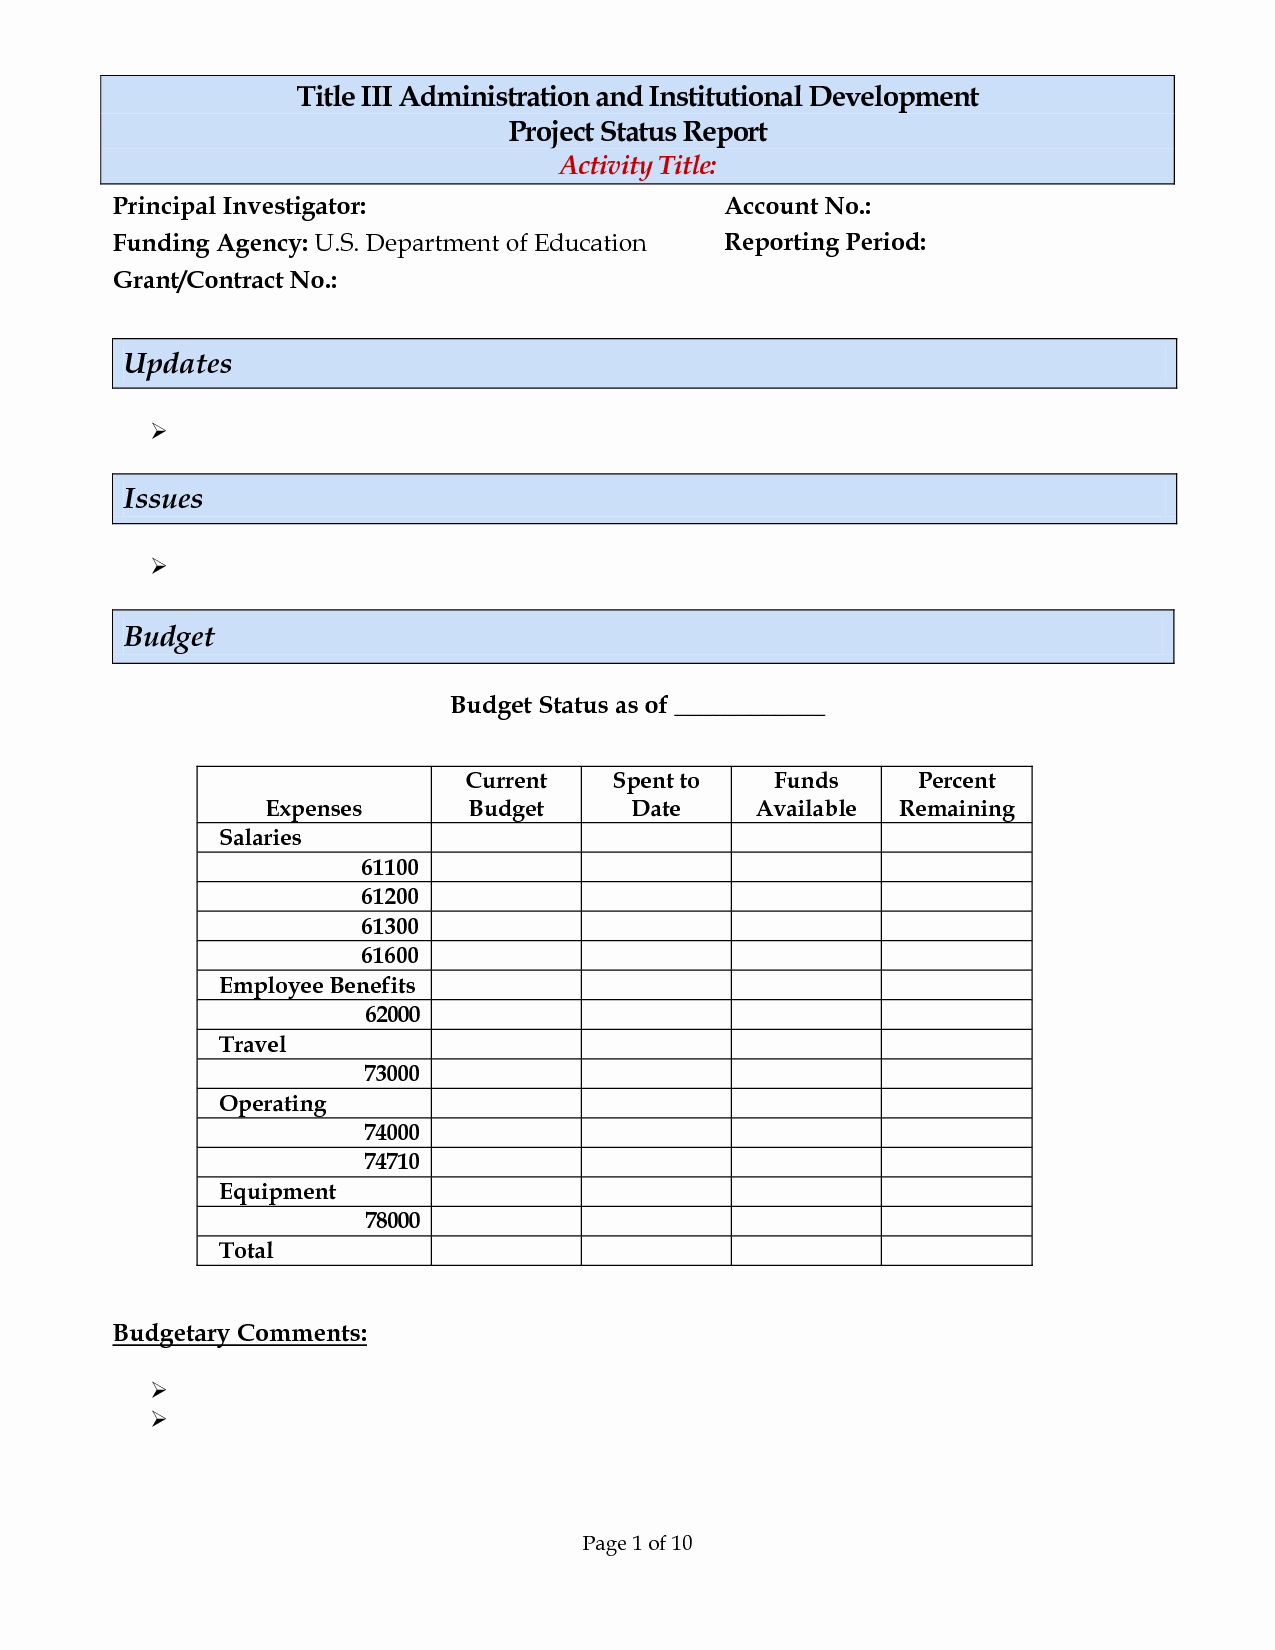 Status Report Template Excel Best Of Project Daily Status Report Template Excel and Monthly